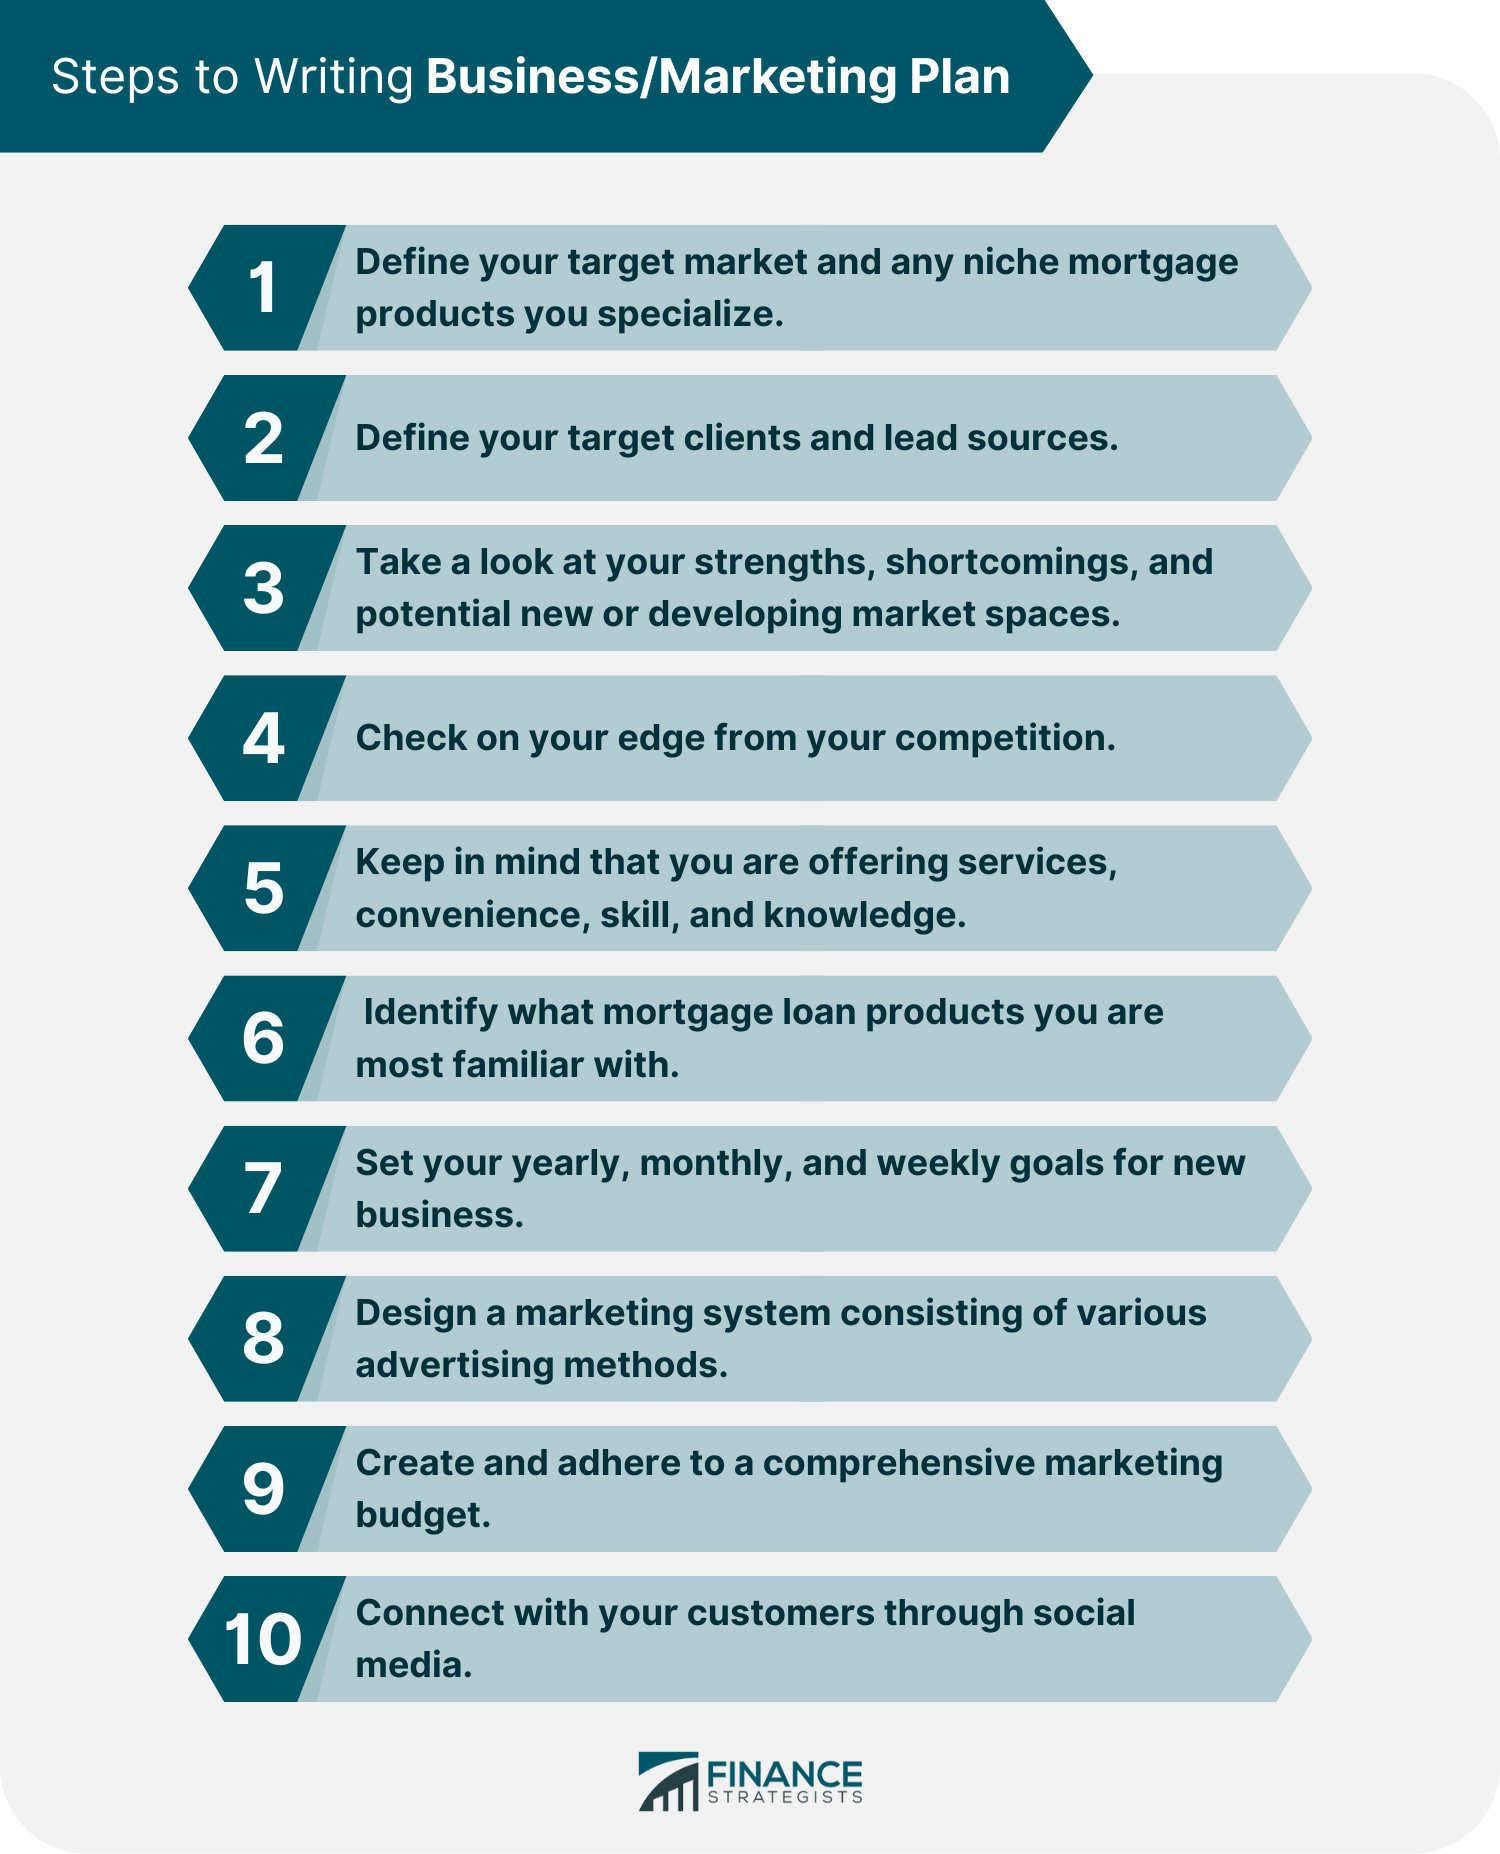 Steps to Writing Business/Marketing Plan